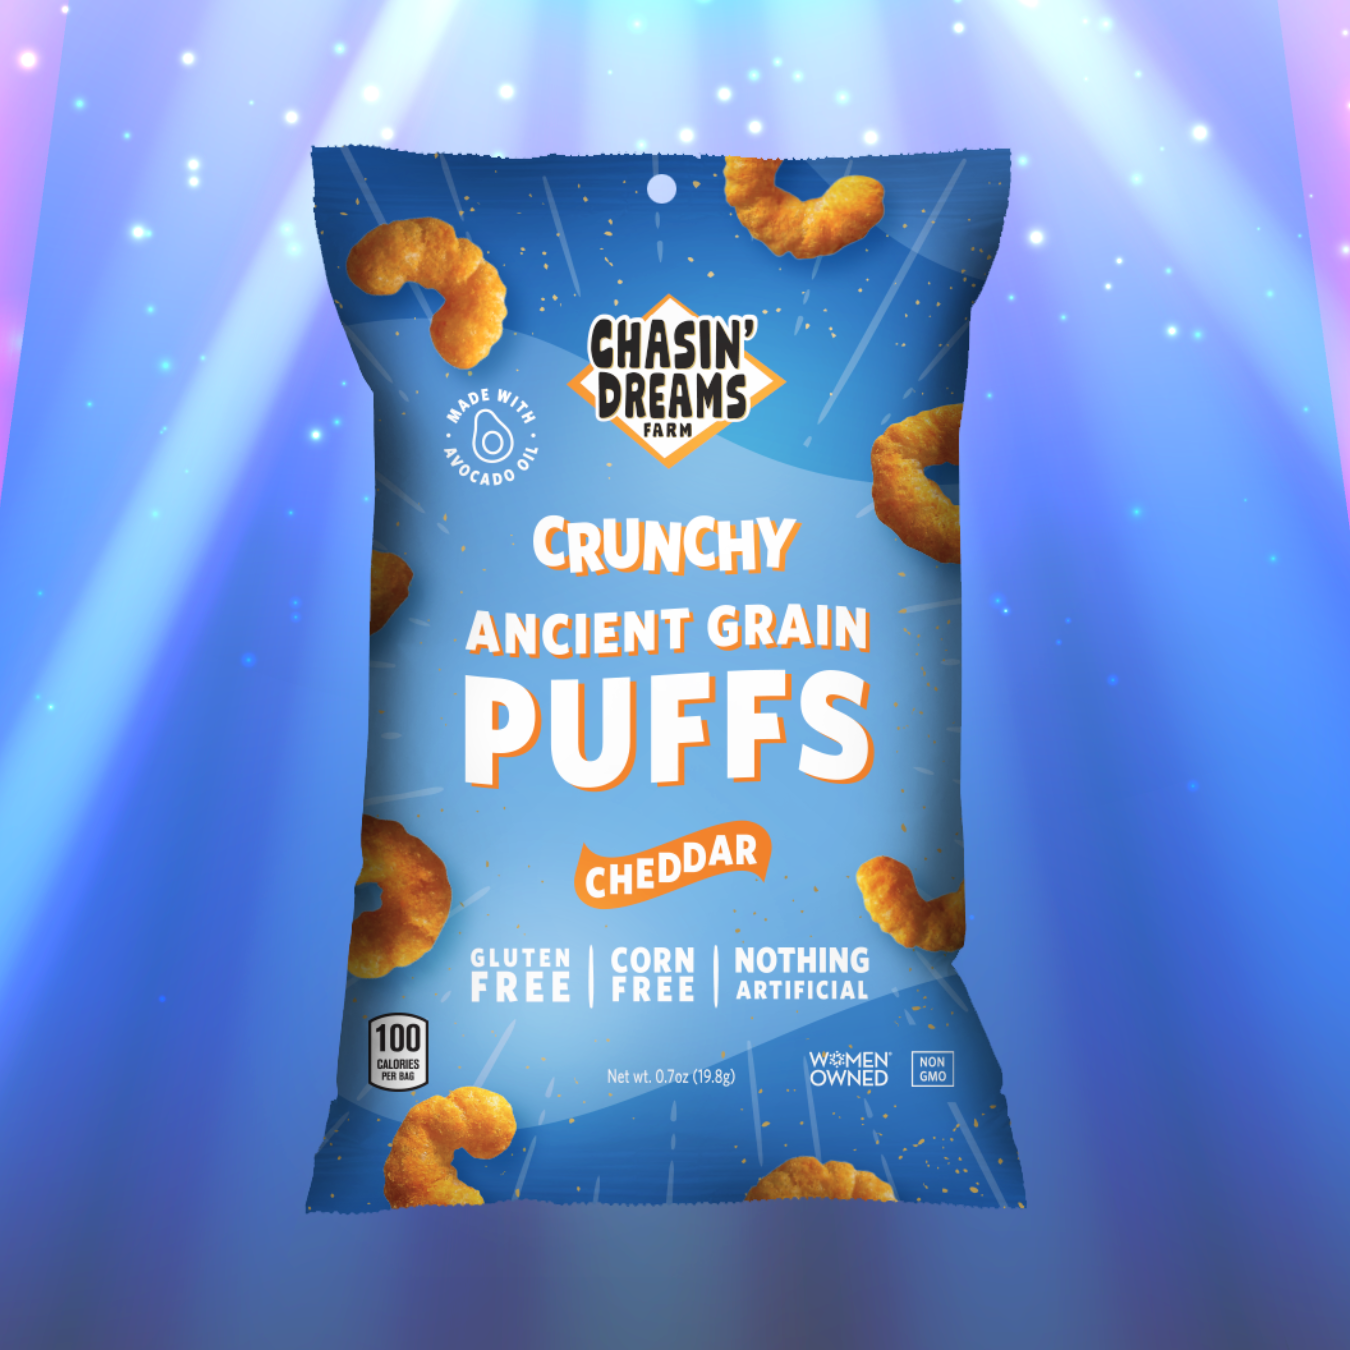 Blue bag of Crunchy Ancient Grain Puffs : Cheddar. Orange puffs on the bag on a blue background with a spotlight.